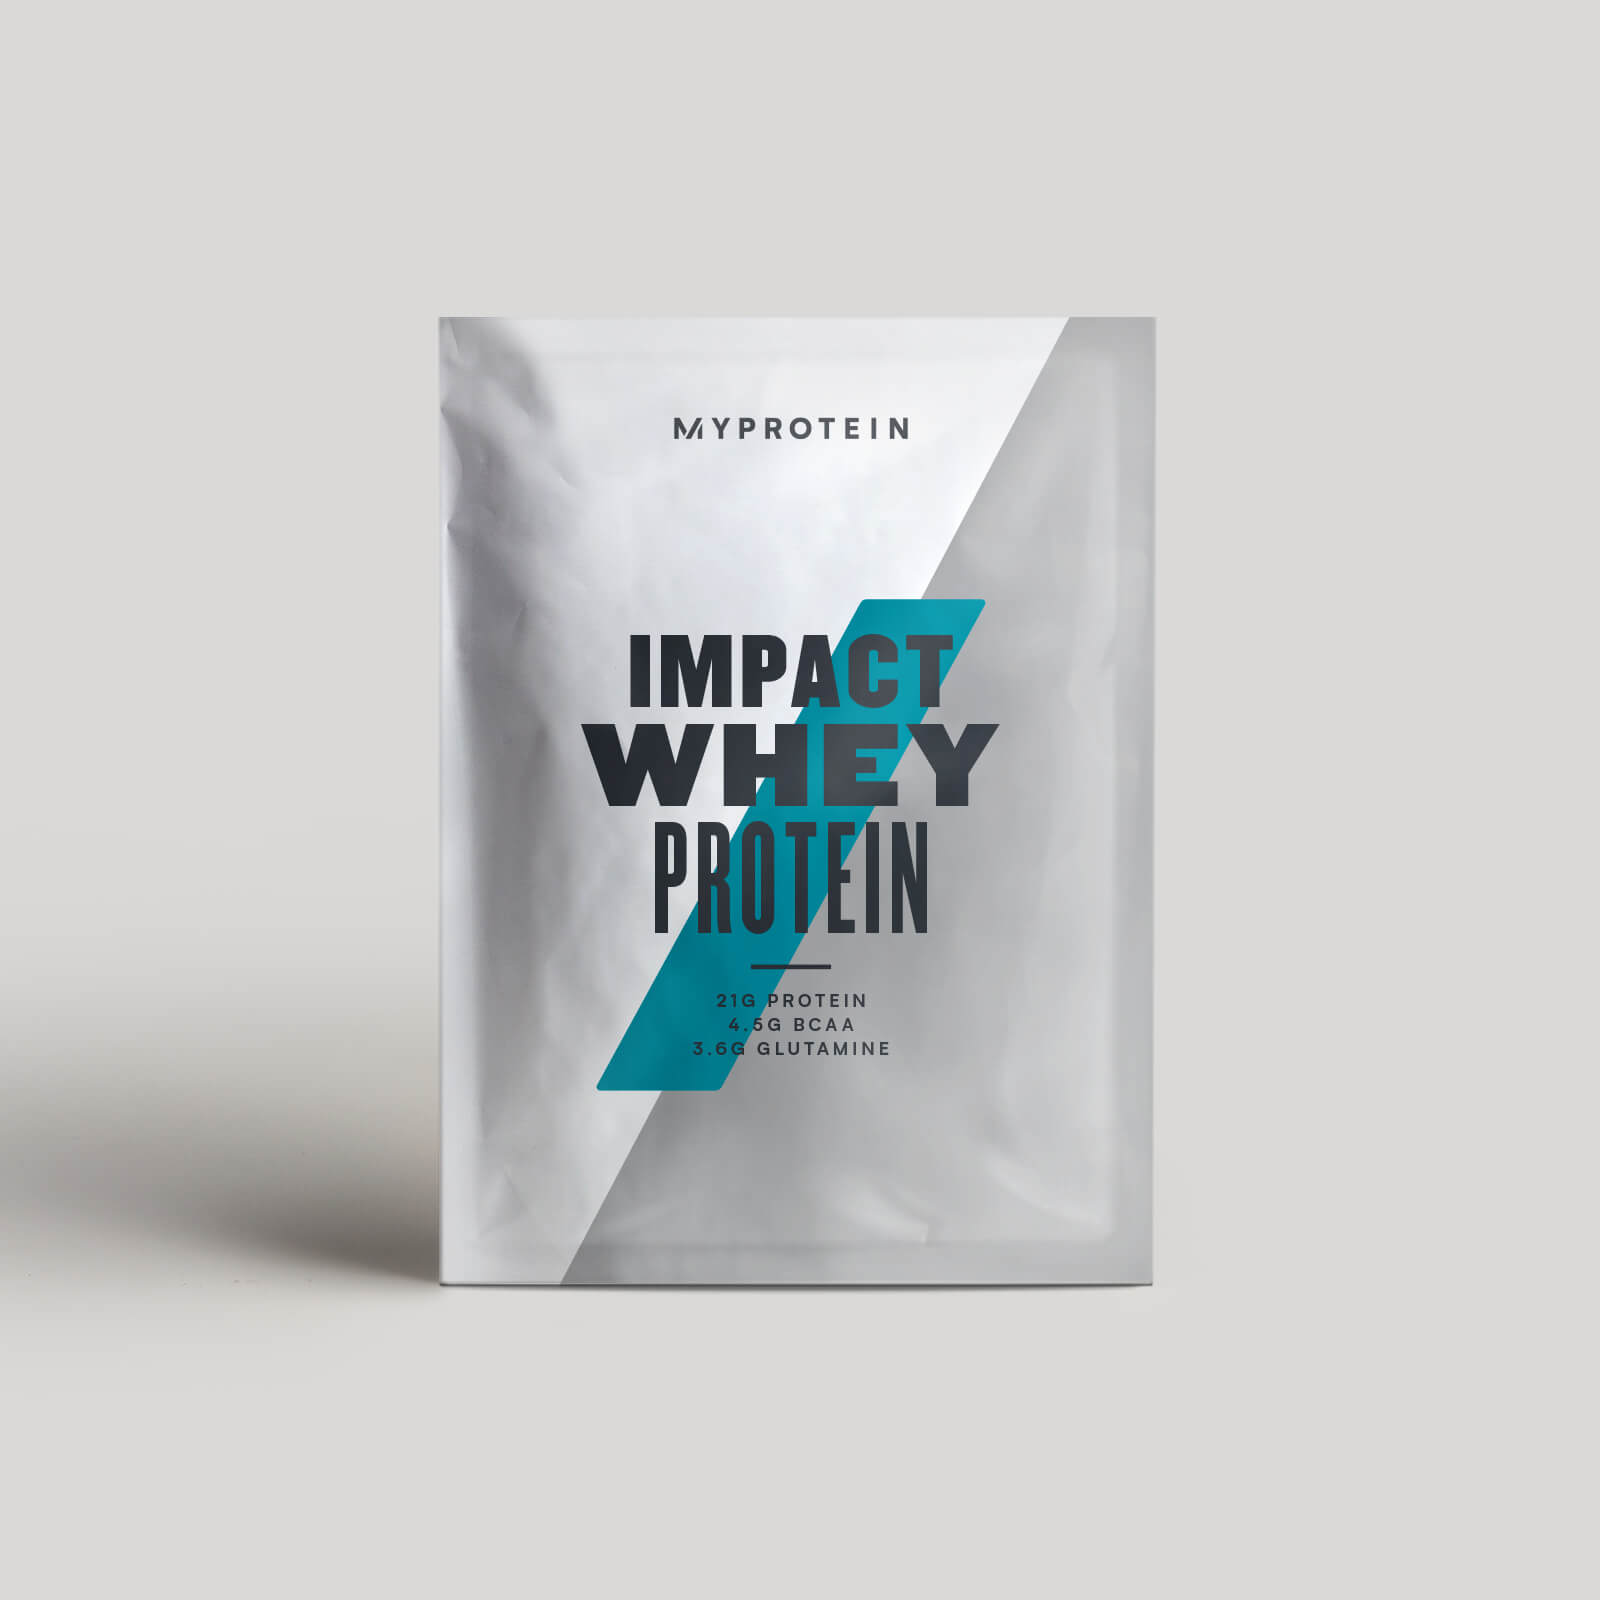 Impact Whey Protein (Sample) - 25g - Chocolate Mint